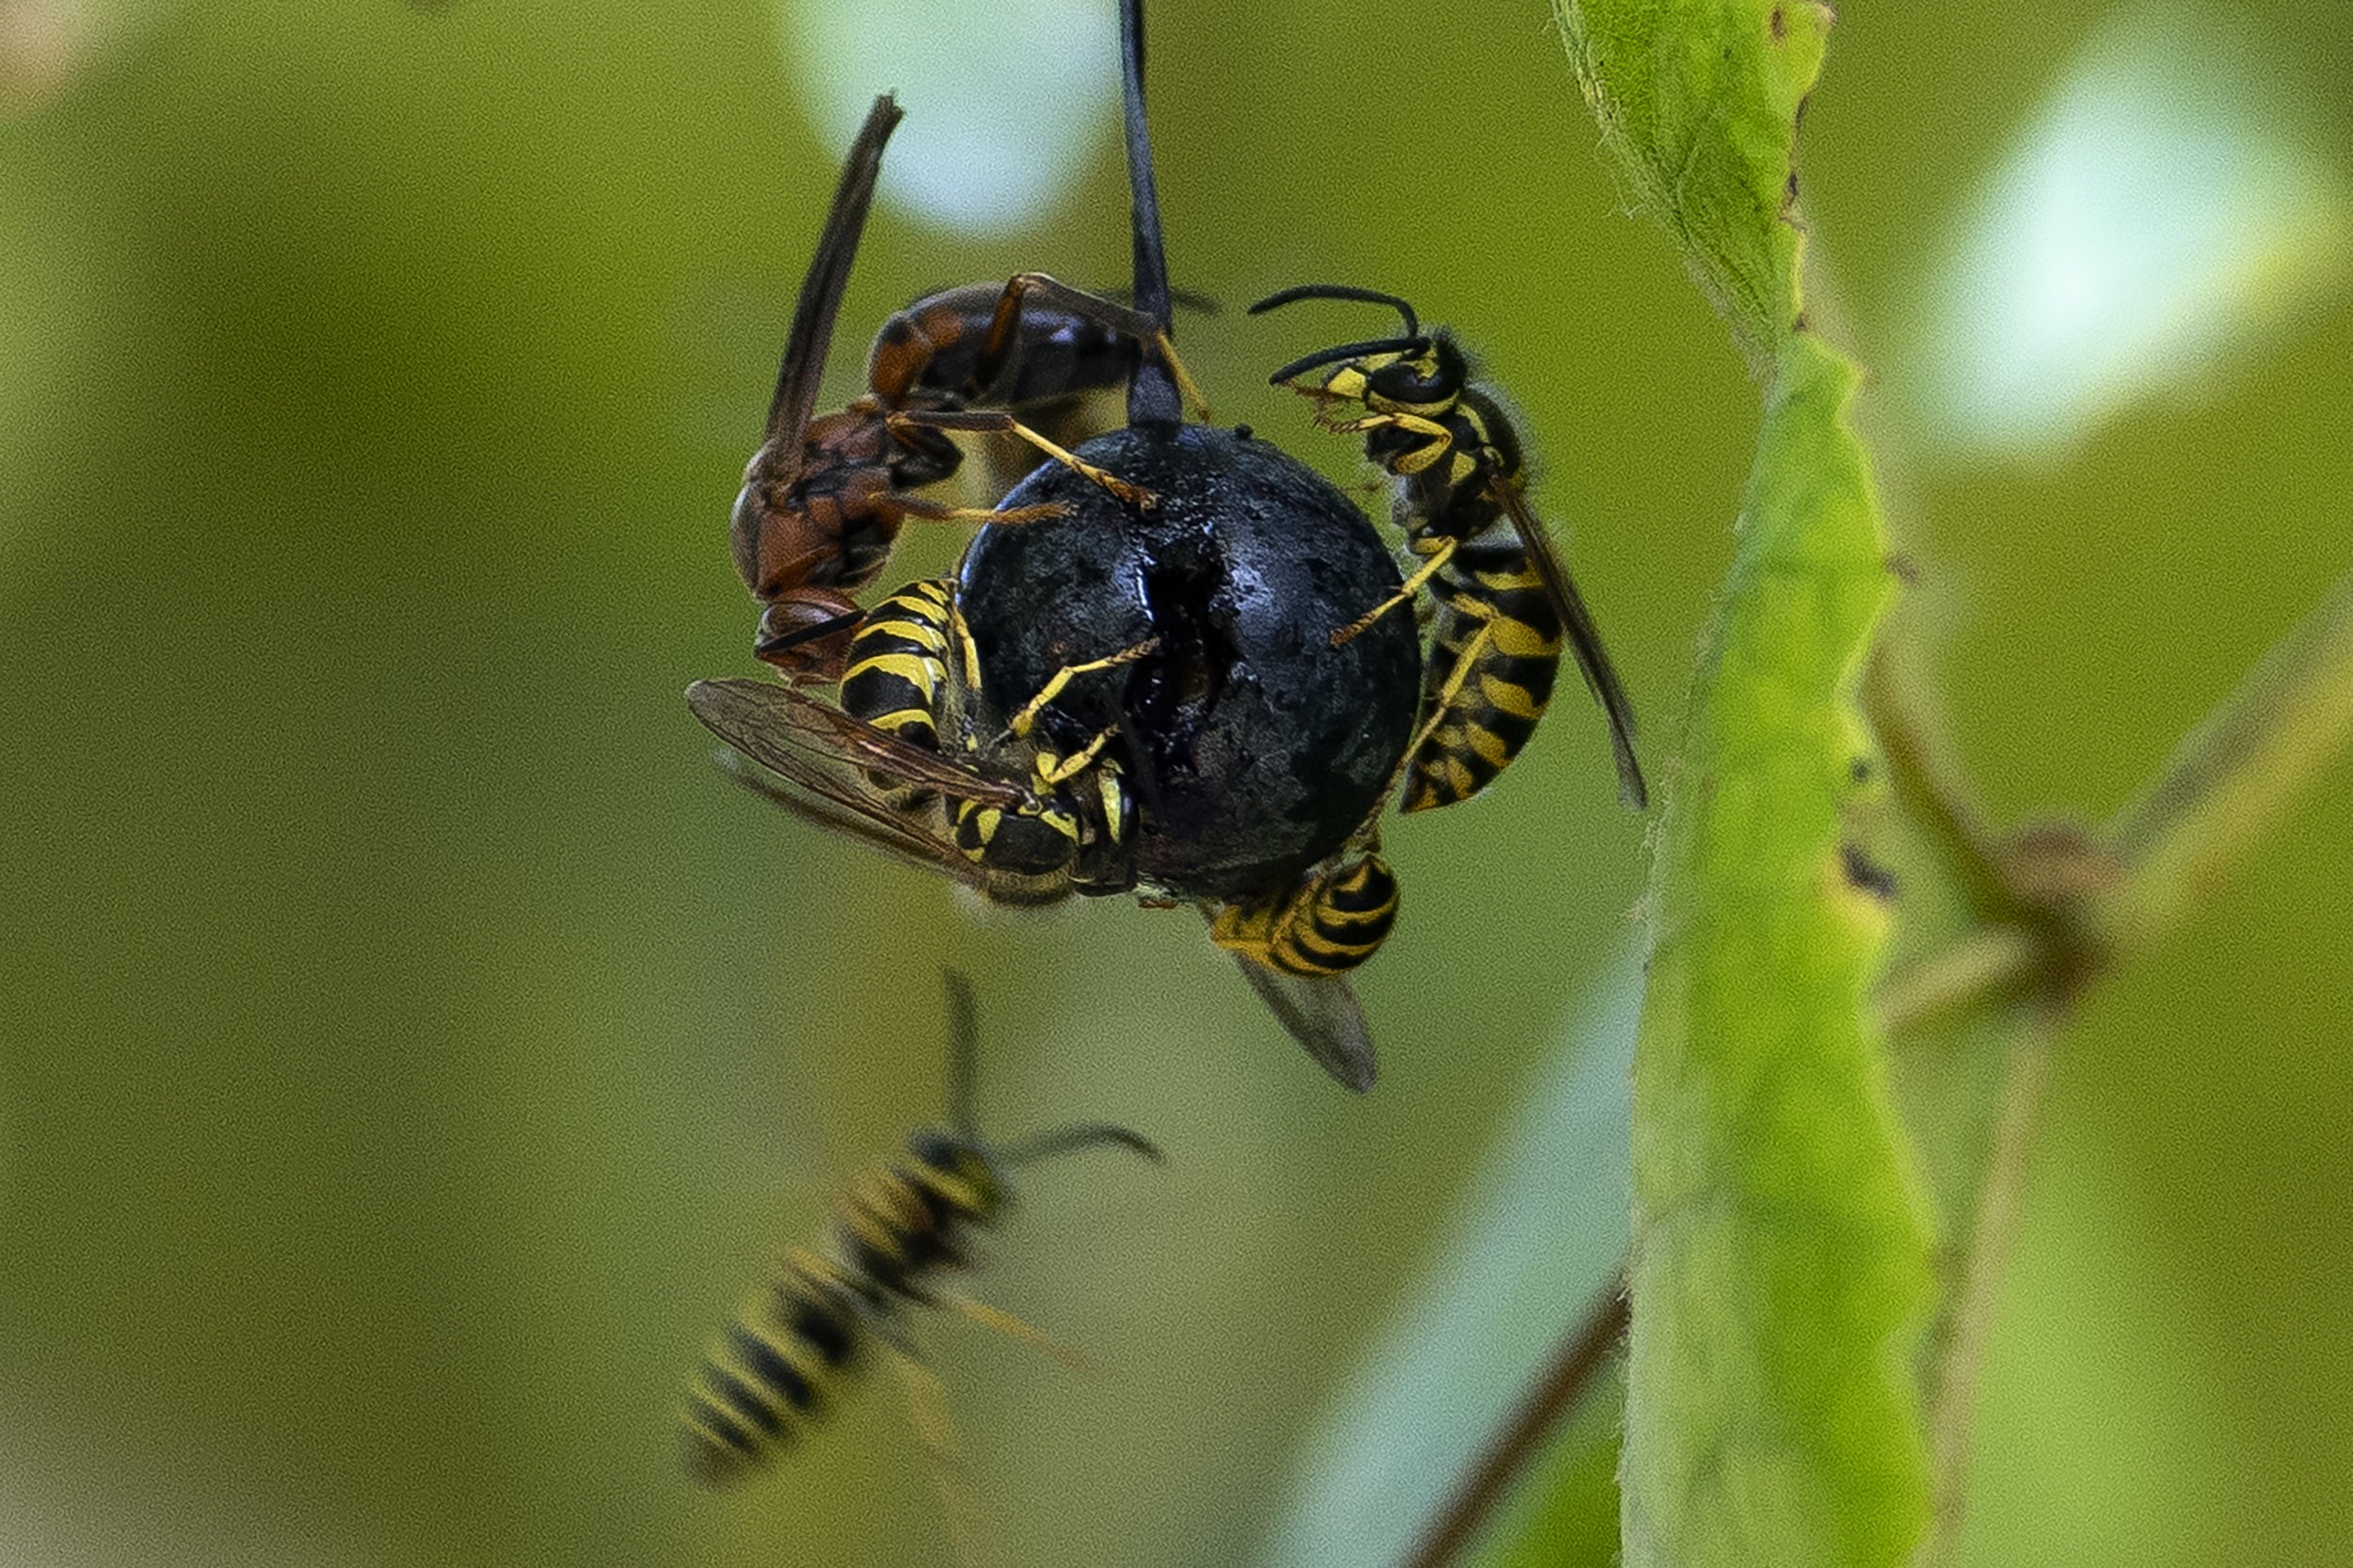  Yellowjackets seen on a Norton grape during picking Oct. 1 in a vineyard of River Ridge Winery in Commerce, Missouri.  